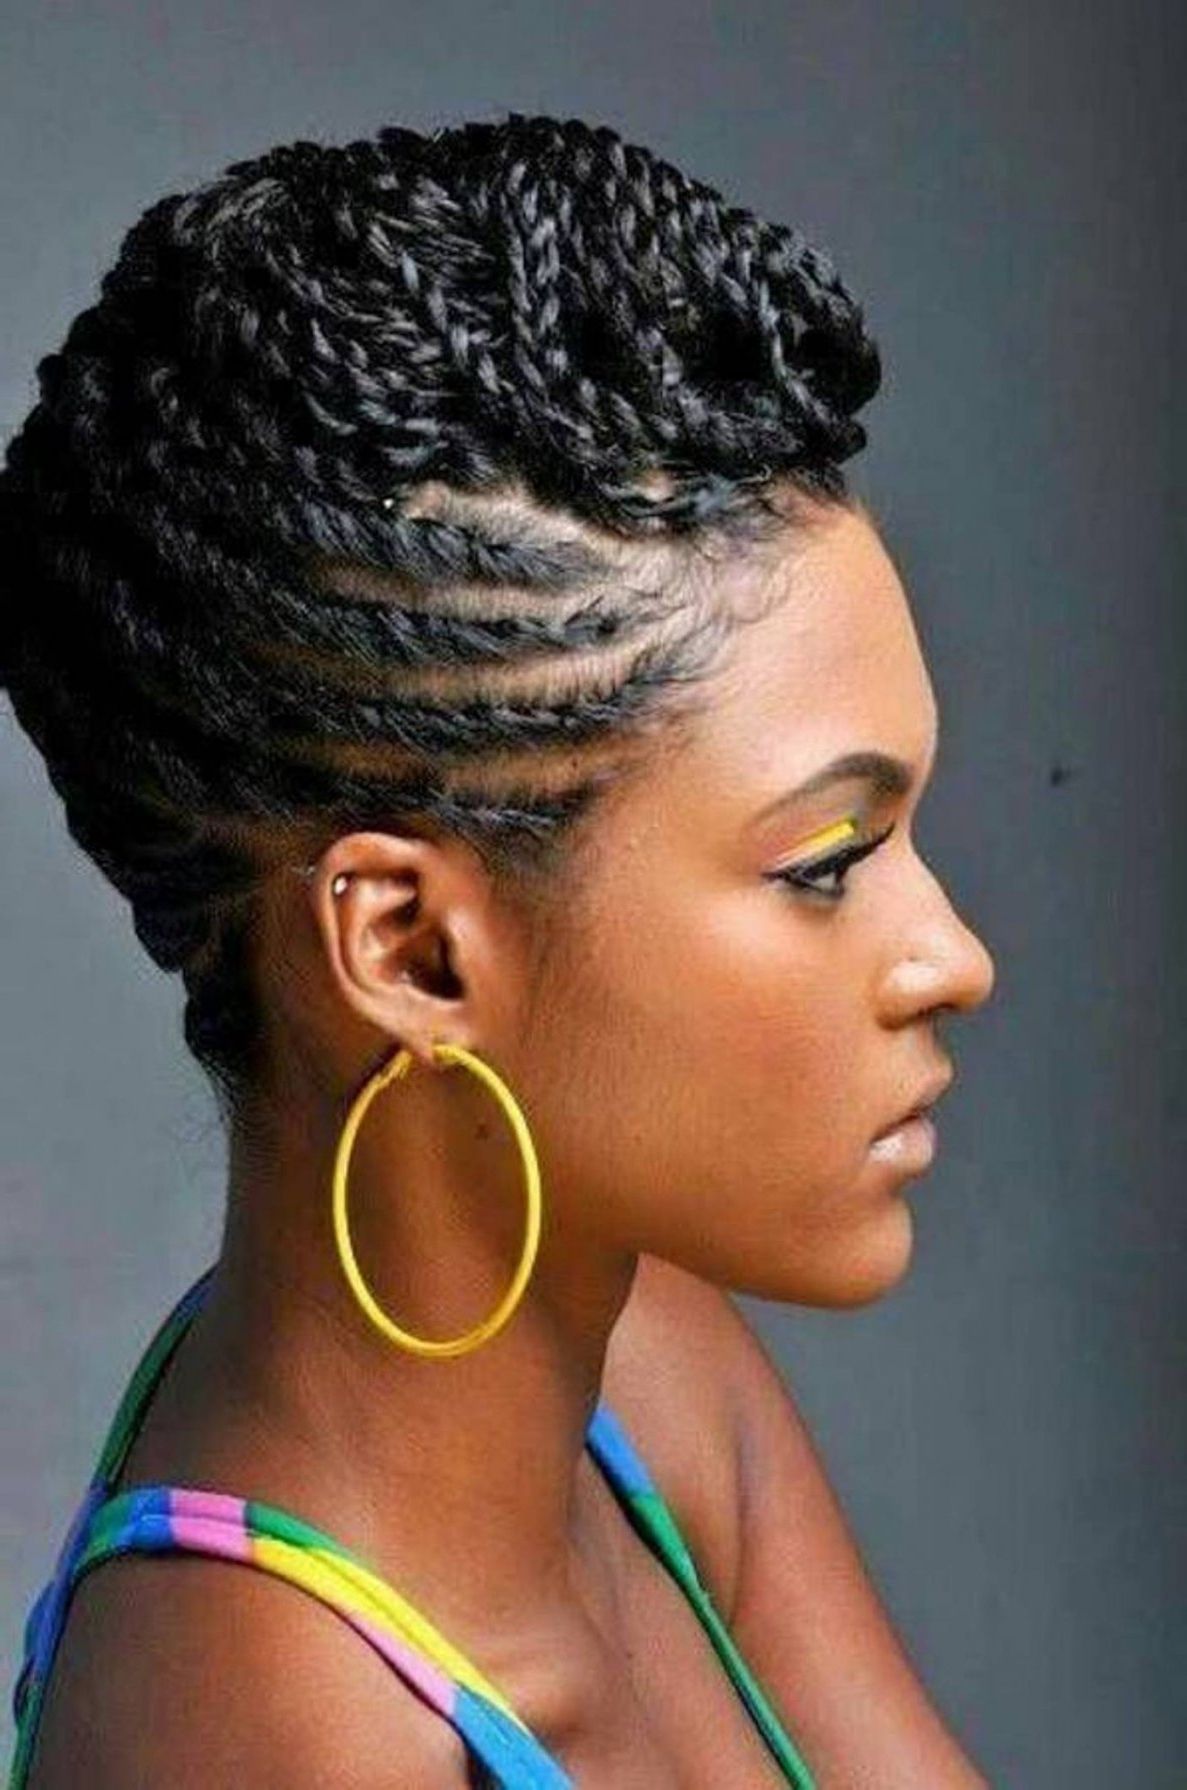 25 Updo Hairstyles For Black Women Throughout Short Braided For Braided Updo Hairstyles For Black Women (View 2 of 15)